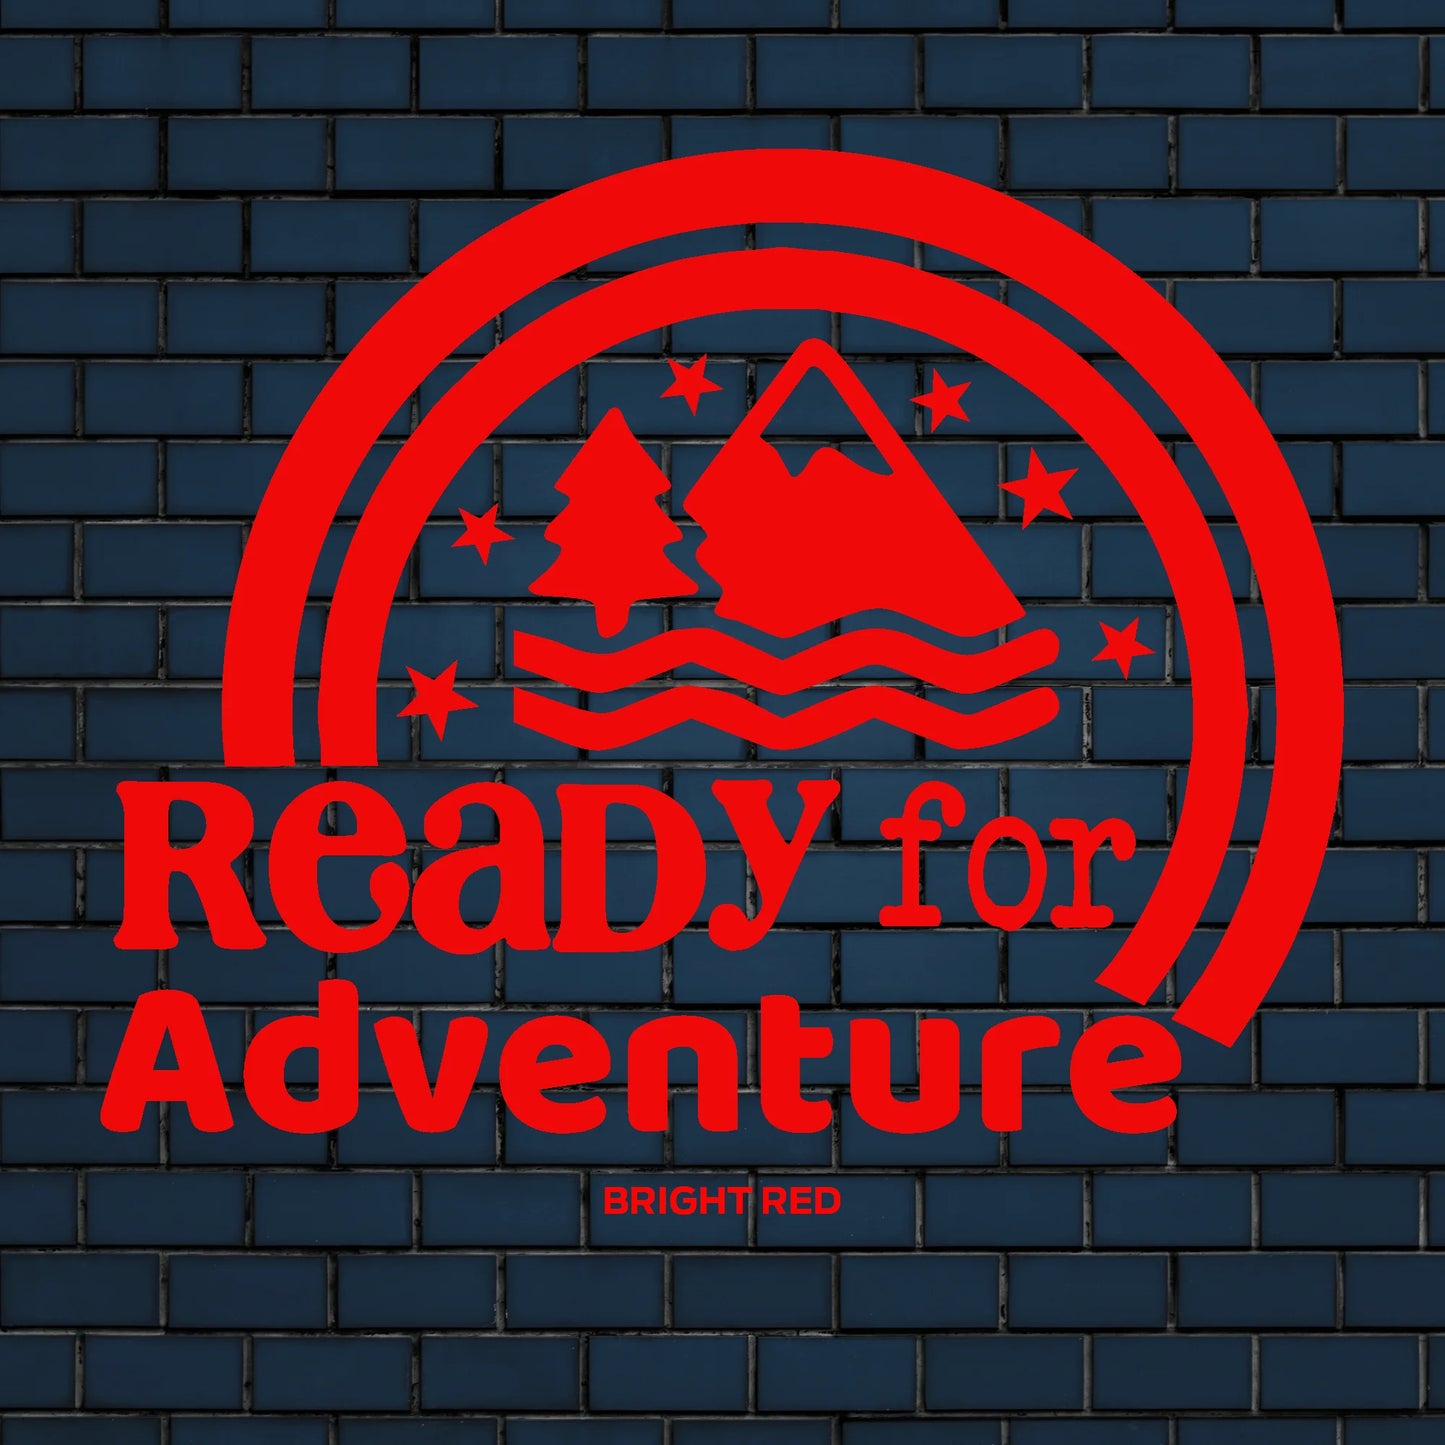 Ready for Adventure motorhome decal sticker | Ready for adventure decal